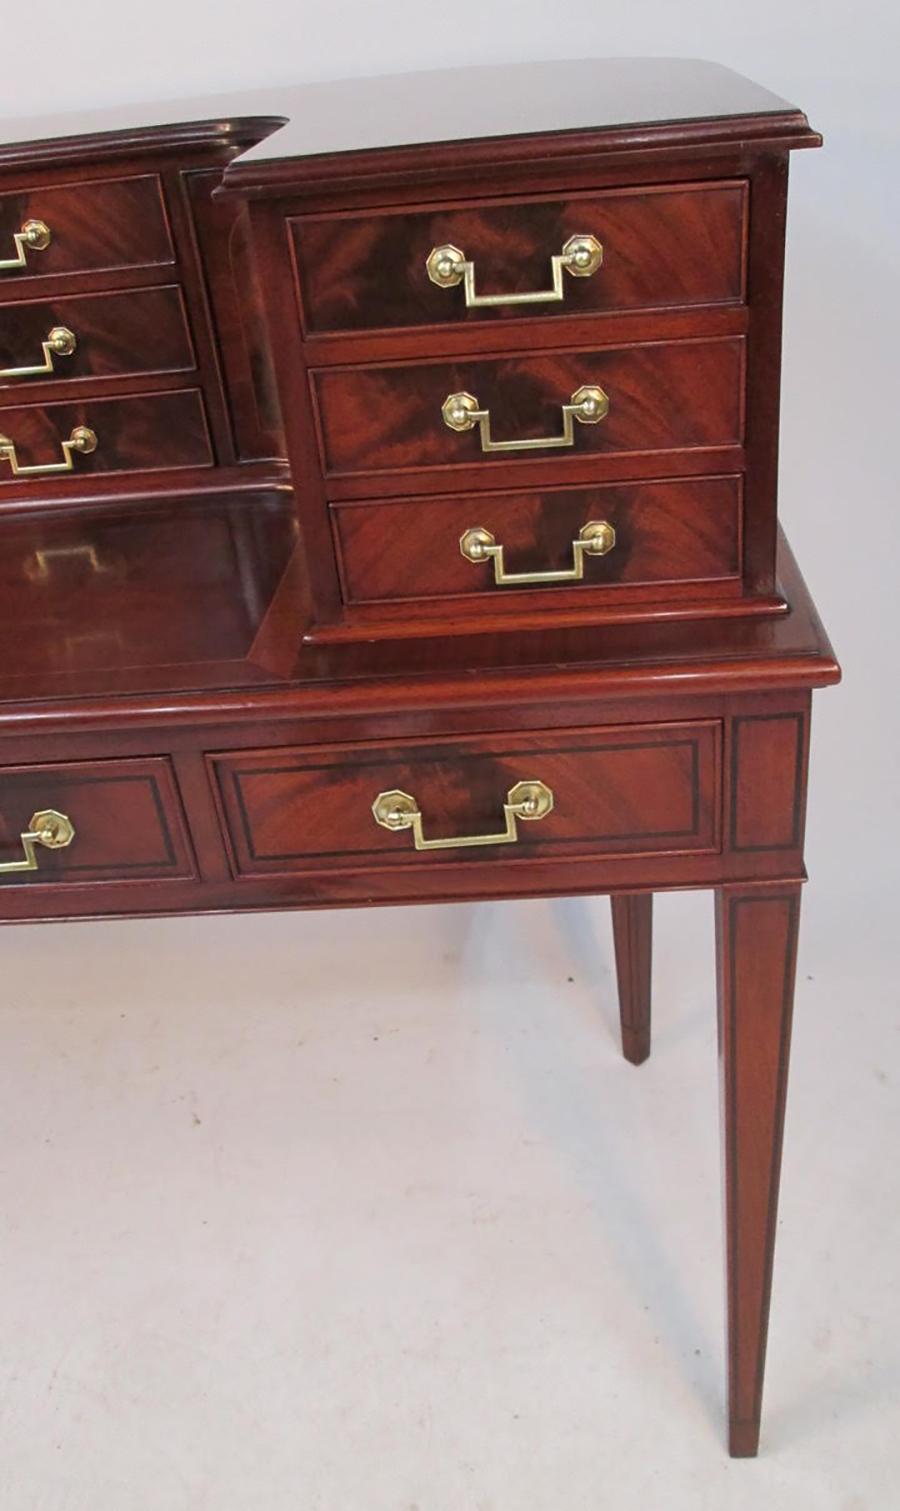 15 Drawer Mahogany Carlton House Desk with Solid Brass Pulls In Good Condition For Sale In Milford, NH